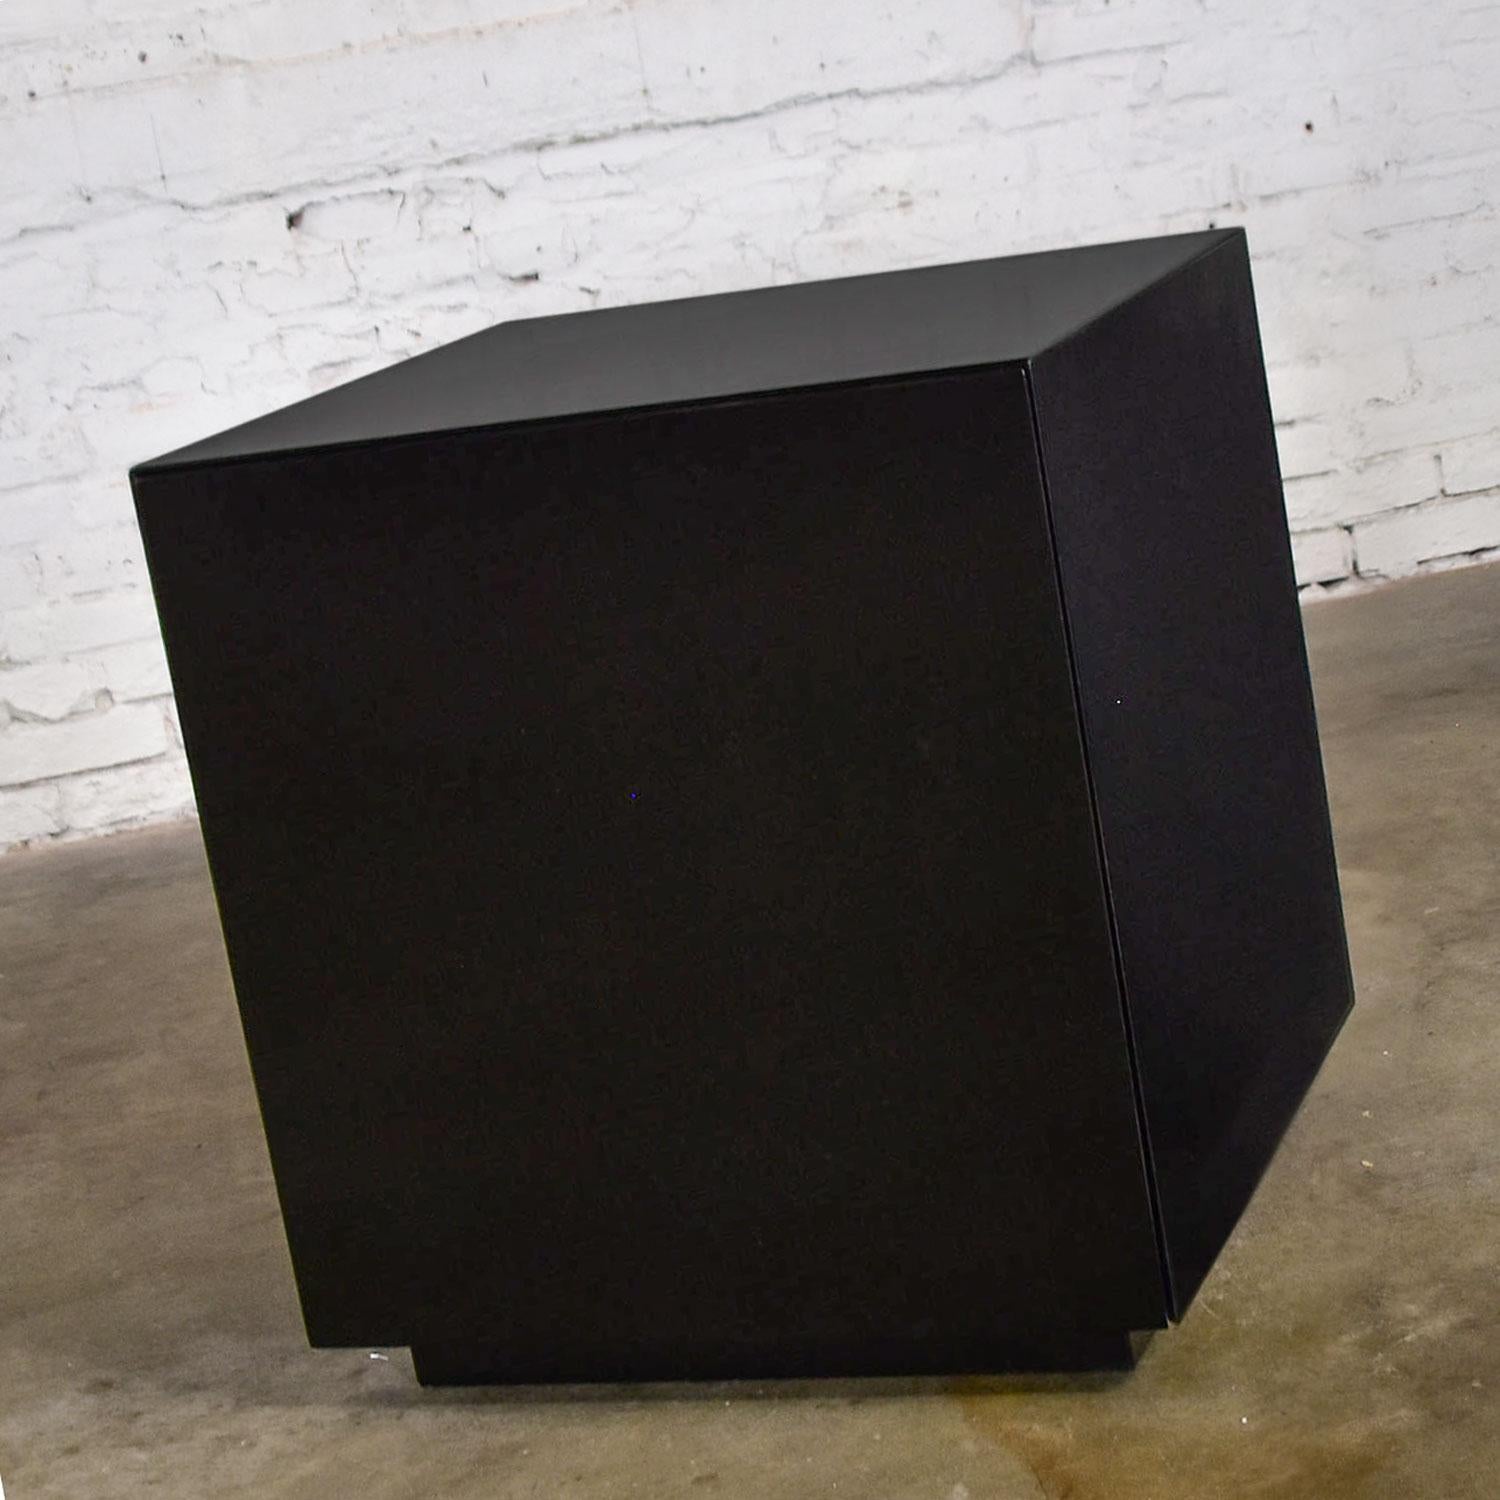 Awesome Mid-Century Modern black painted wood cube cabinet end table or cabinet side table. Wonderful vintage condition with a fresh coat of black paint with a coat of urethane for durability. Not without imperfections as you would expect with use.